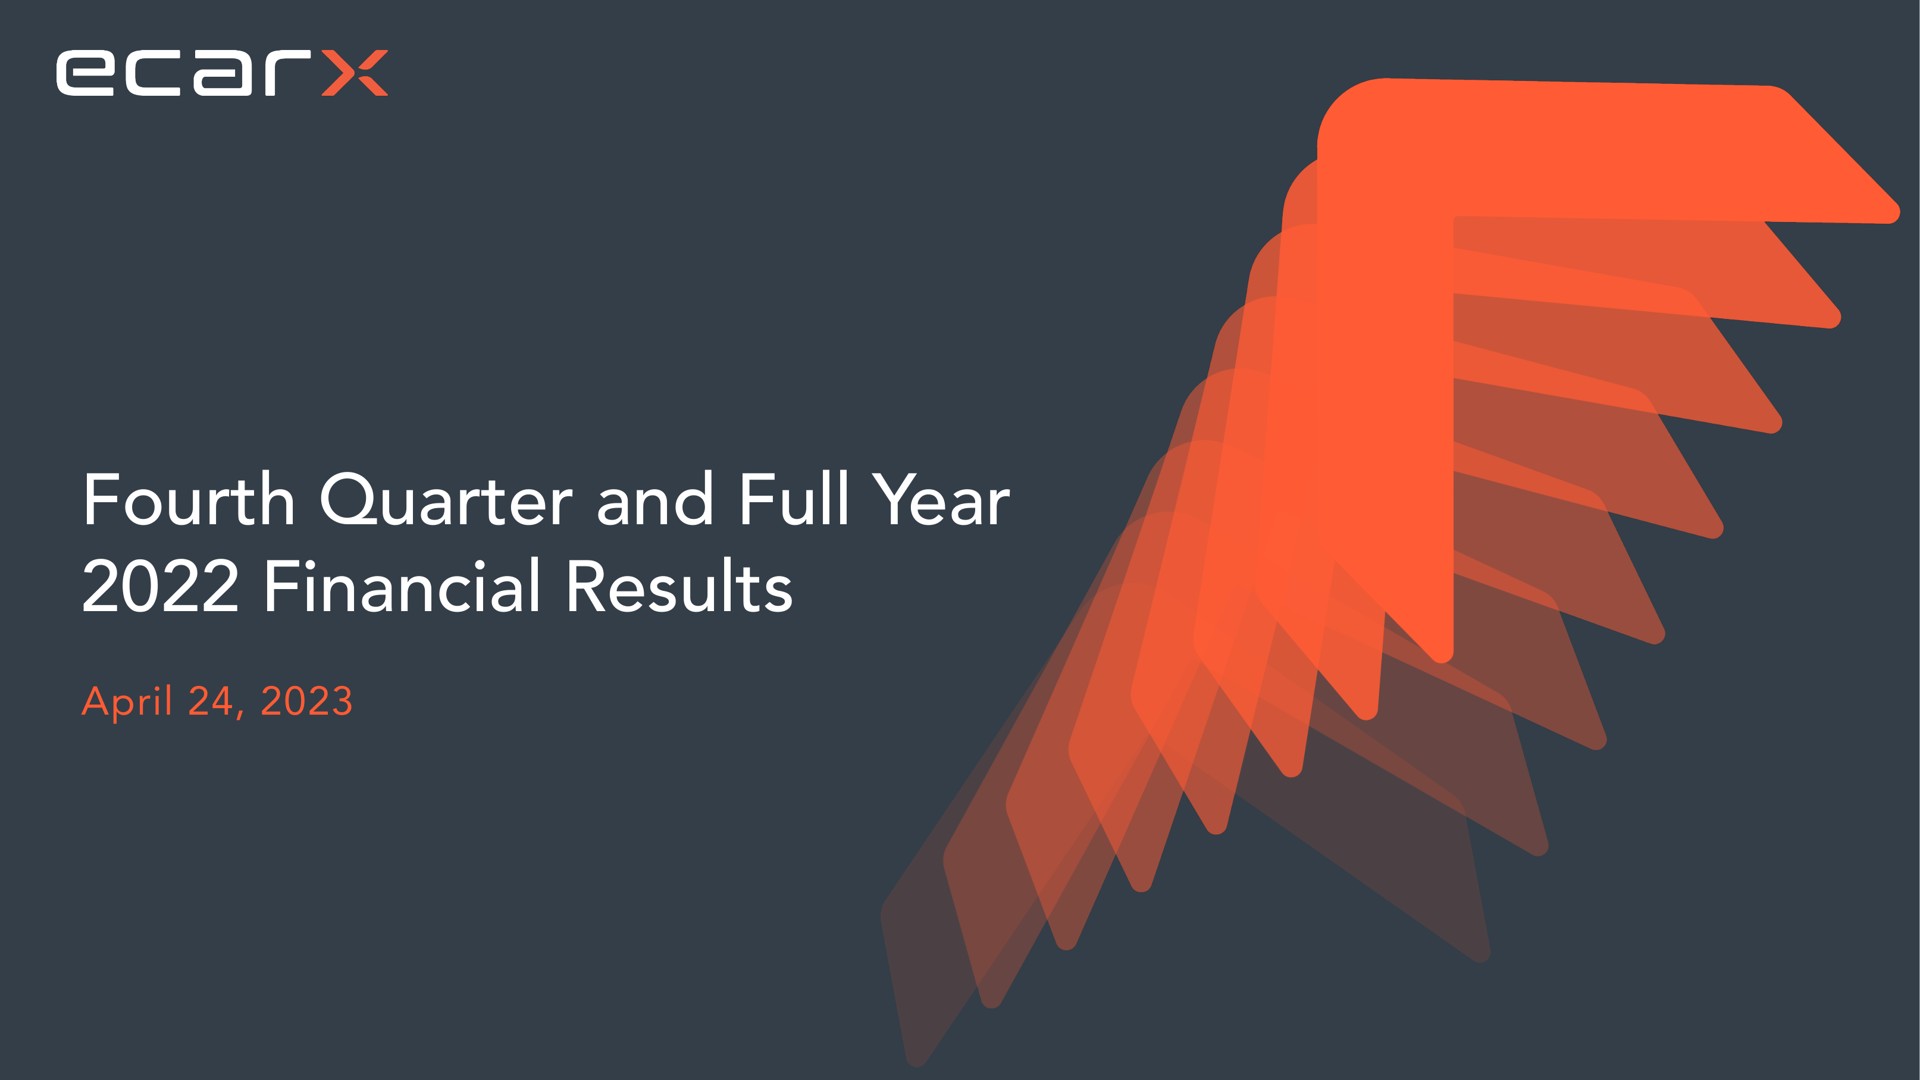 fourth quarter and full year financial results | Ecarx